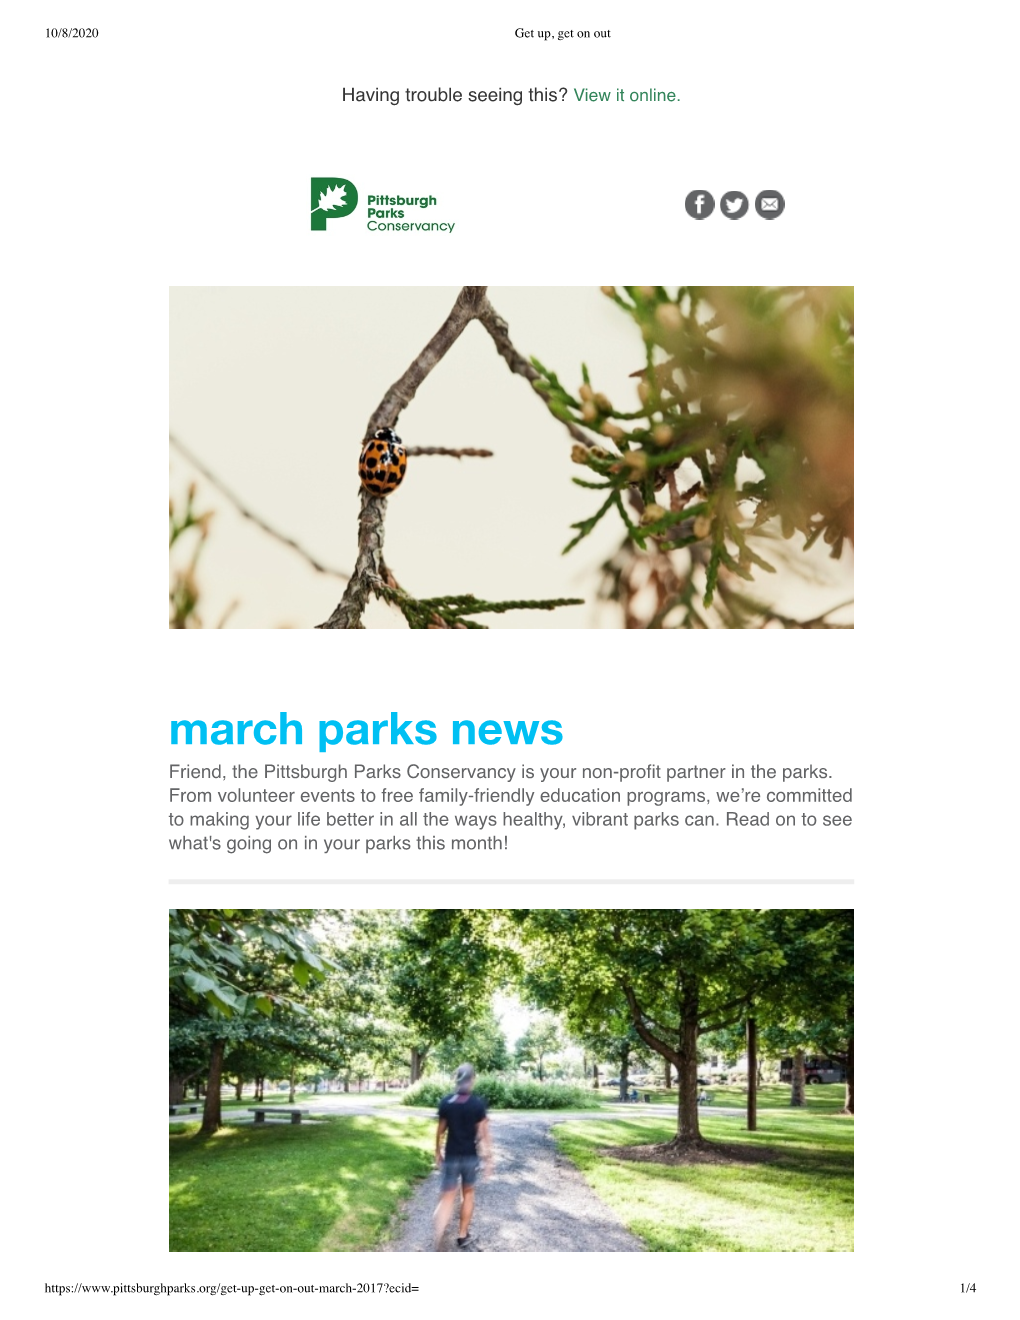 March Parks News Friend, the Pittsburgh Parks Conservancy Is Your Non-Proﬁt Partner in the Parks